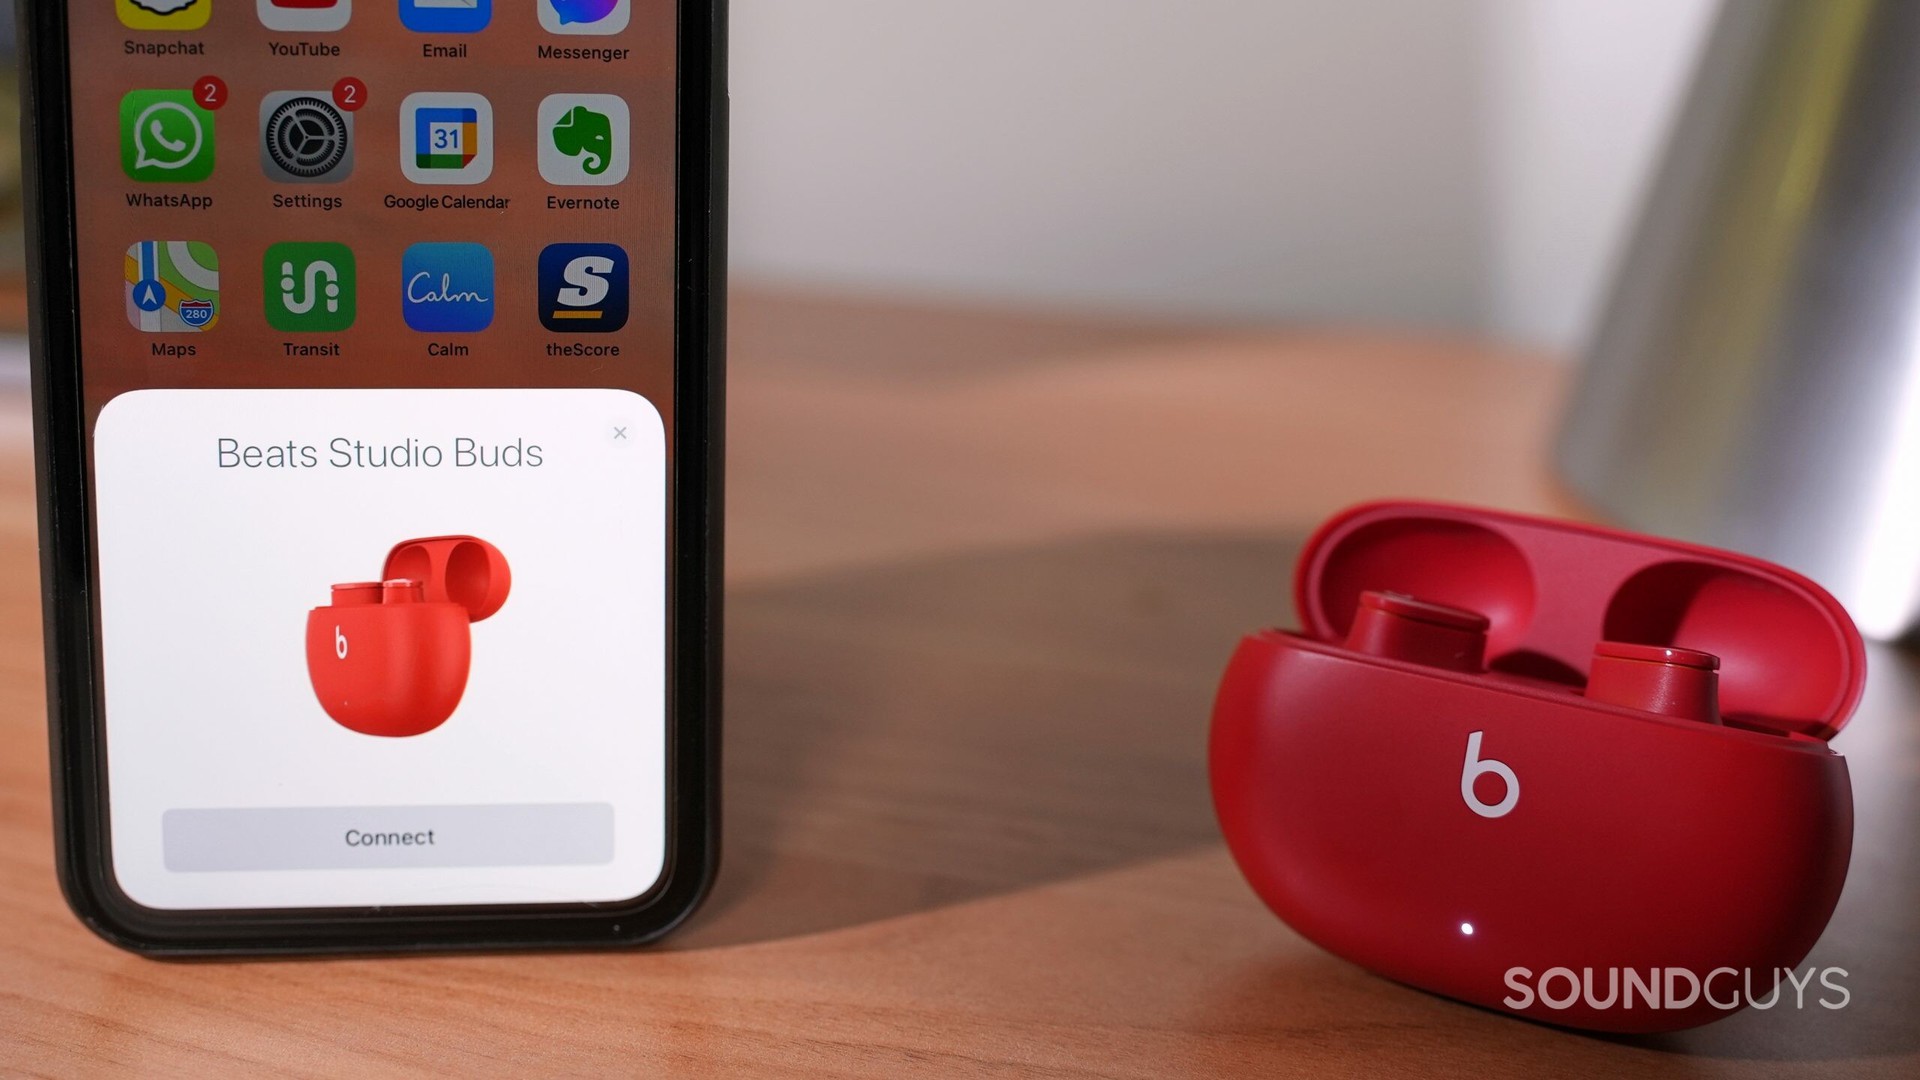 Beats Studio Buds noise-canceling true wireless headset pairing mode with iPhone.